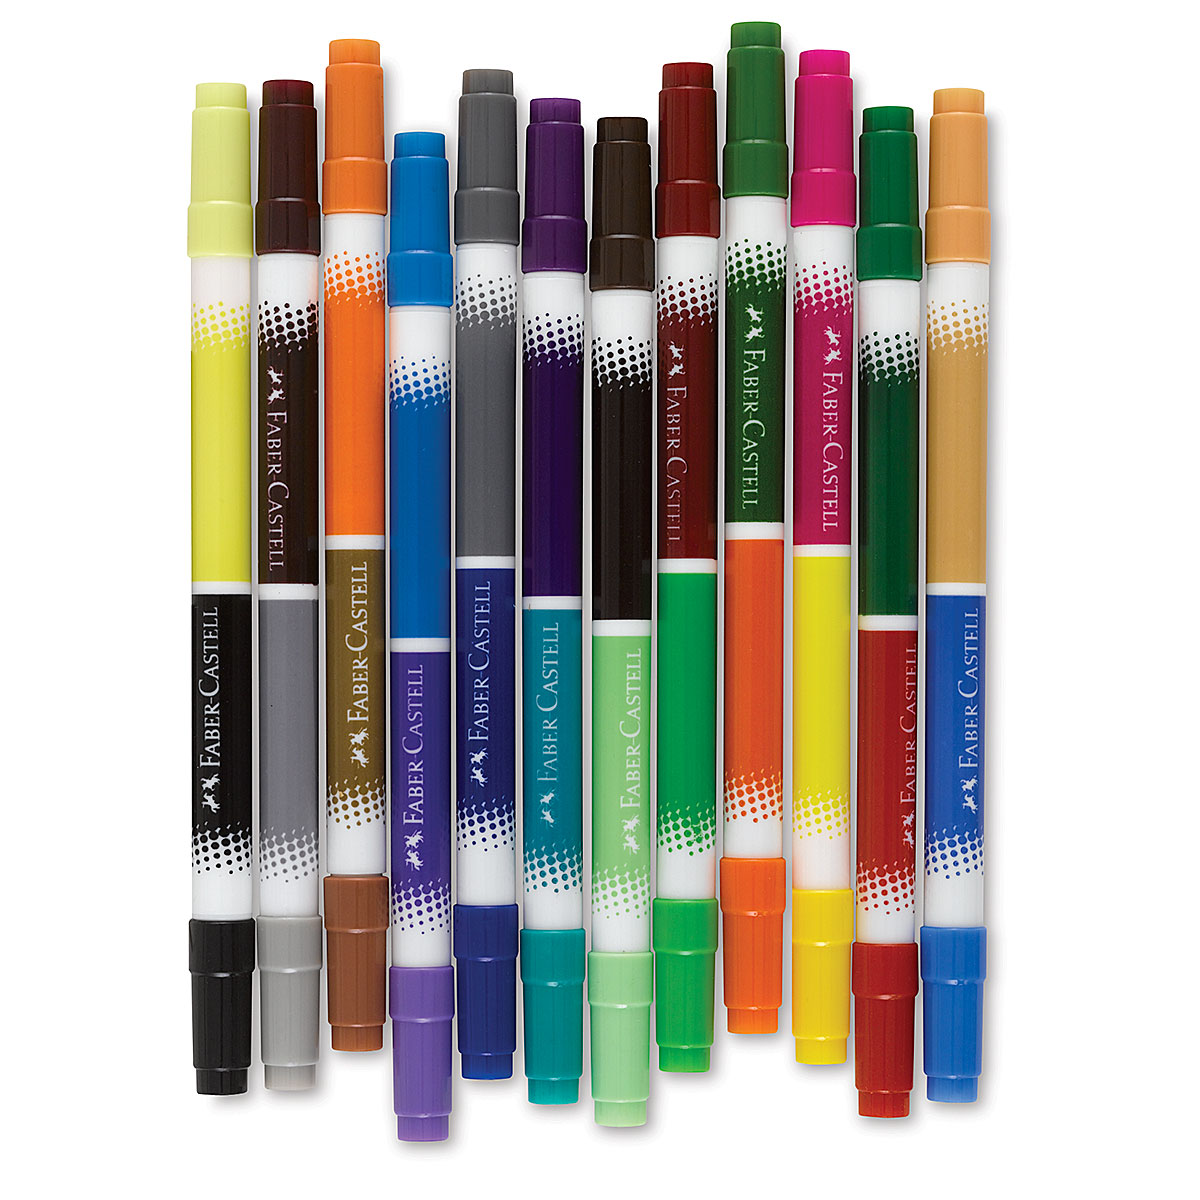 Faber-Castell Duo Tip Washable Markers 12 Set